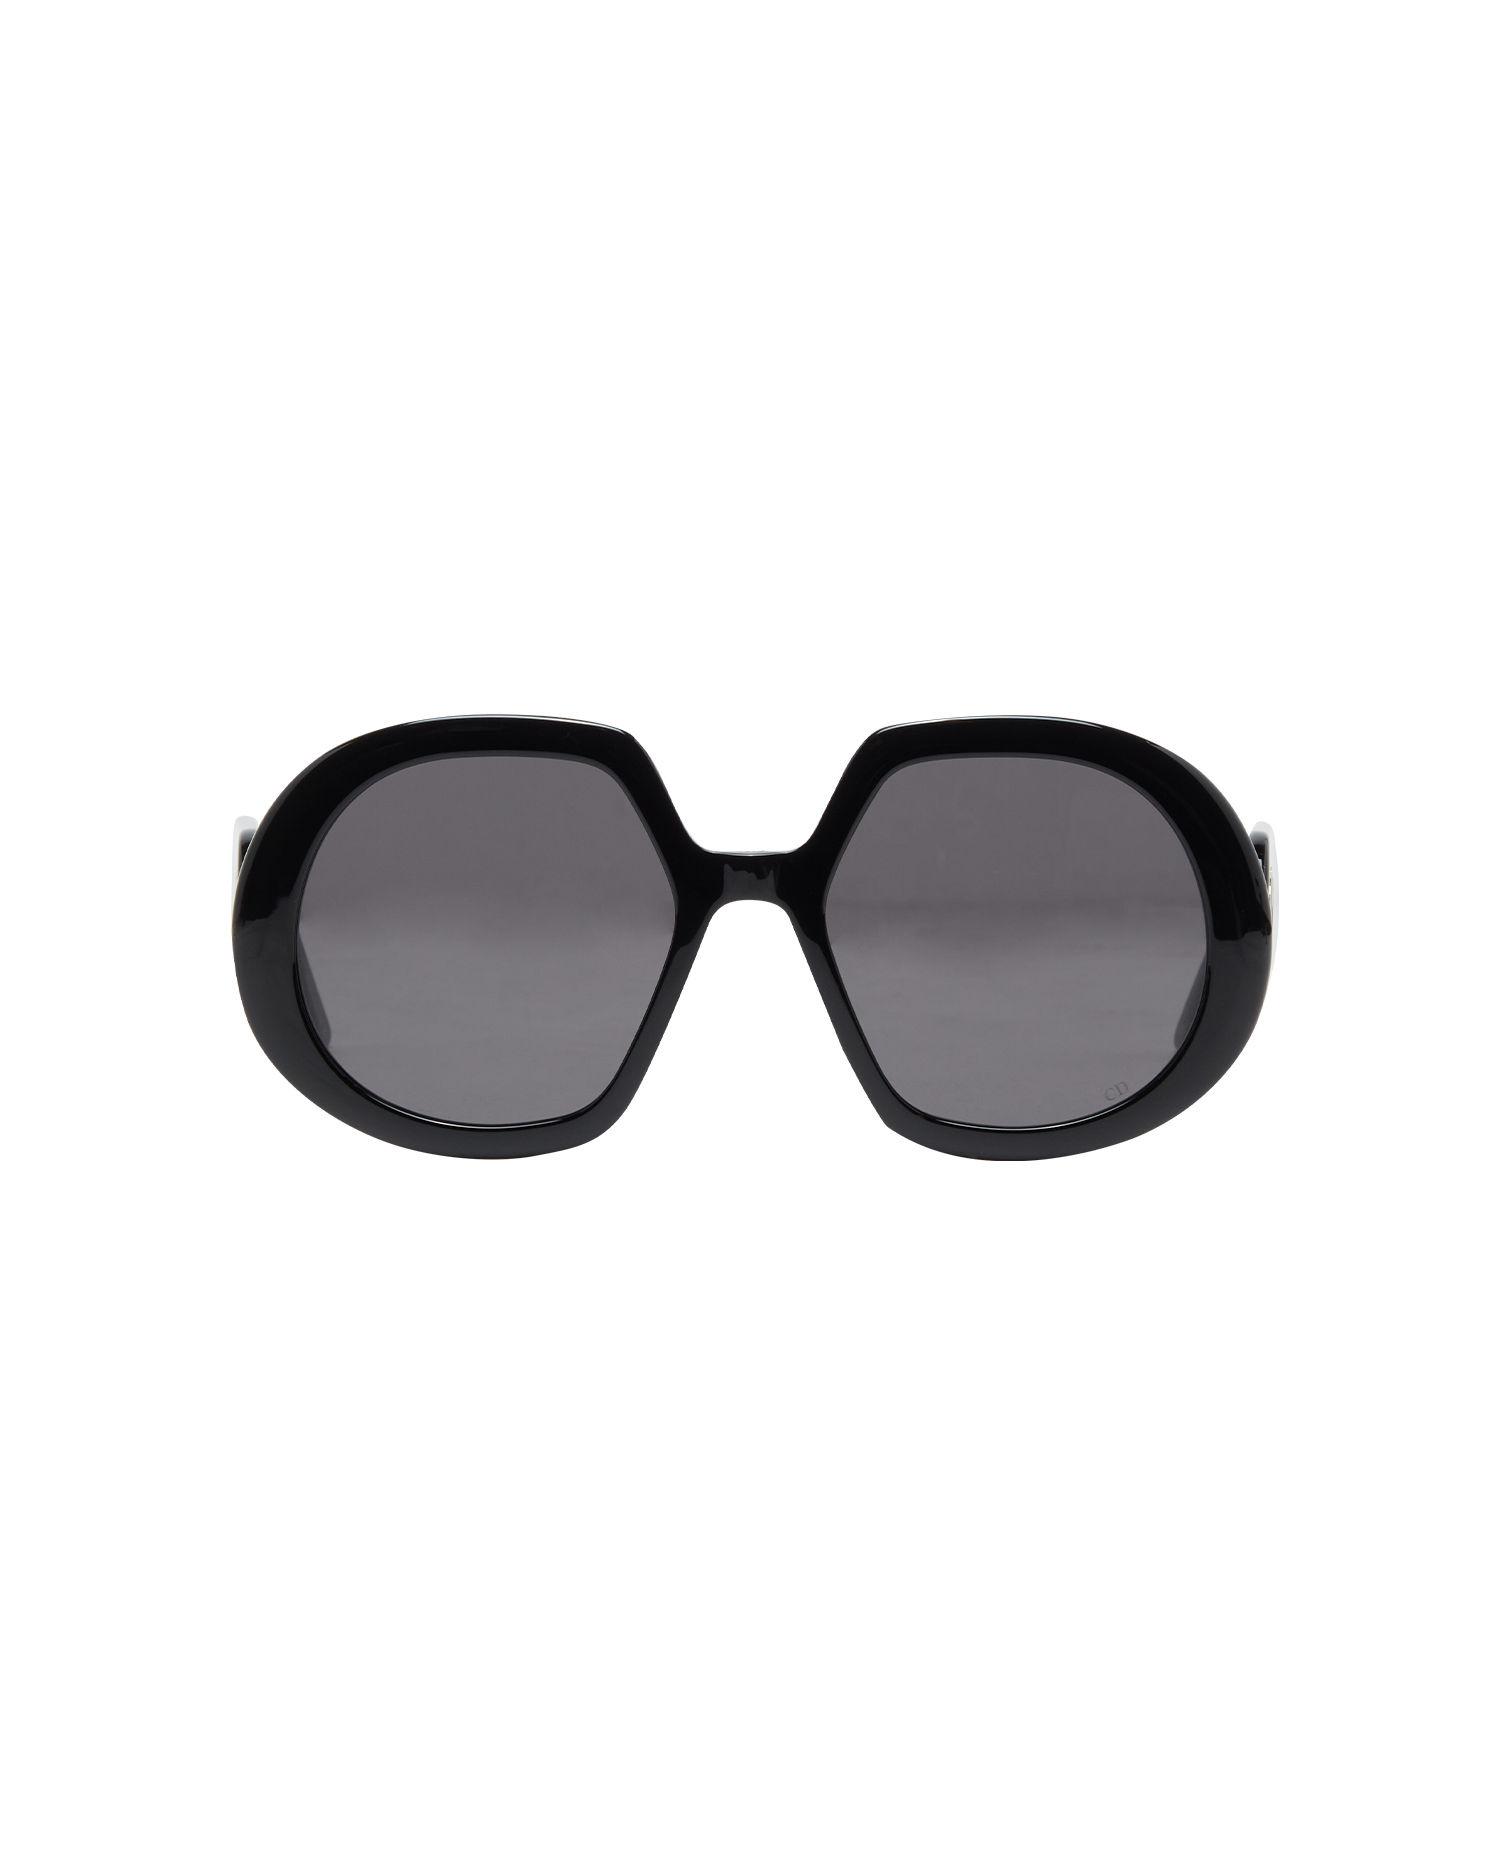 DiorBobby sunglasses by CHRISTIAN DIOR